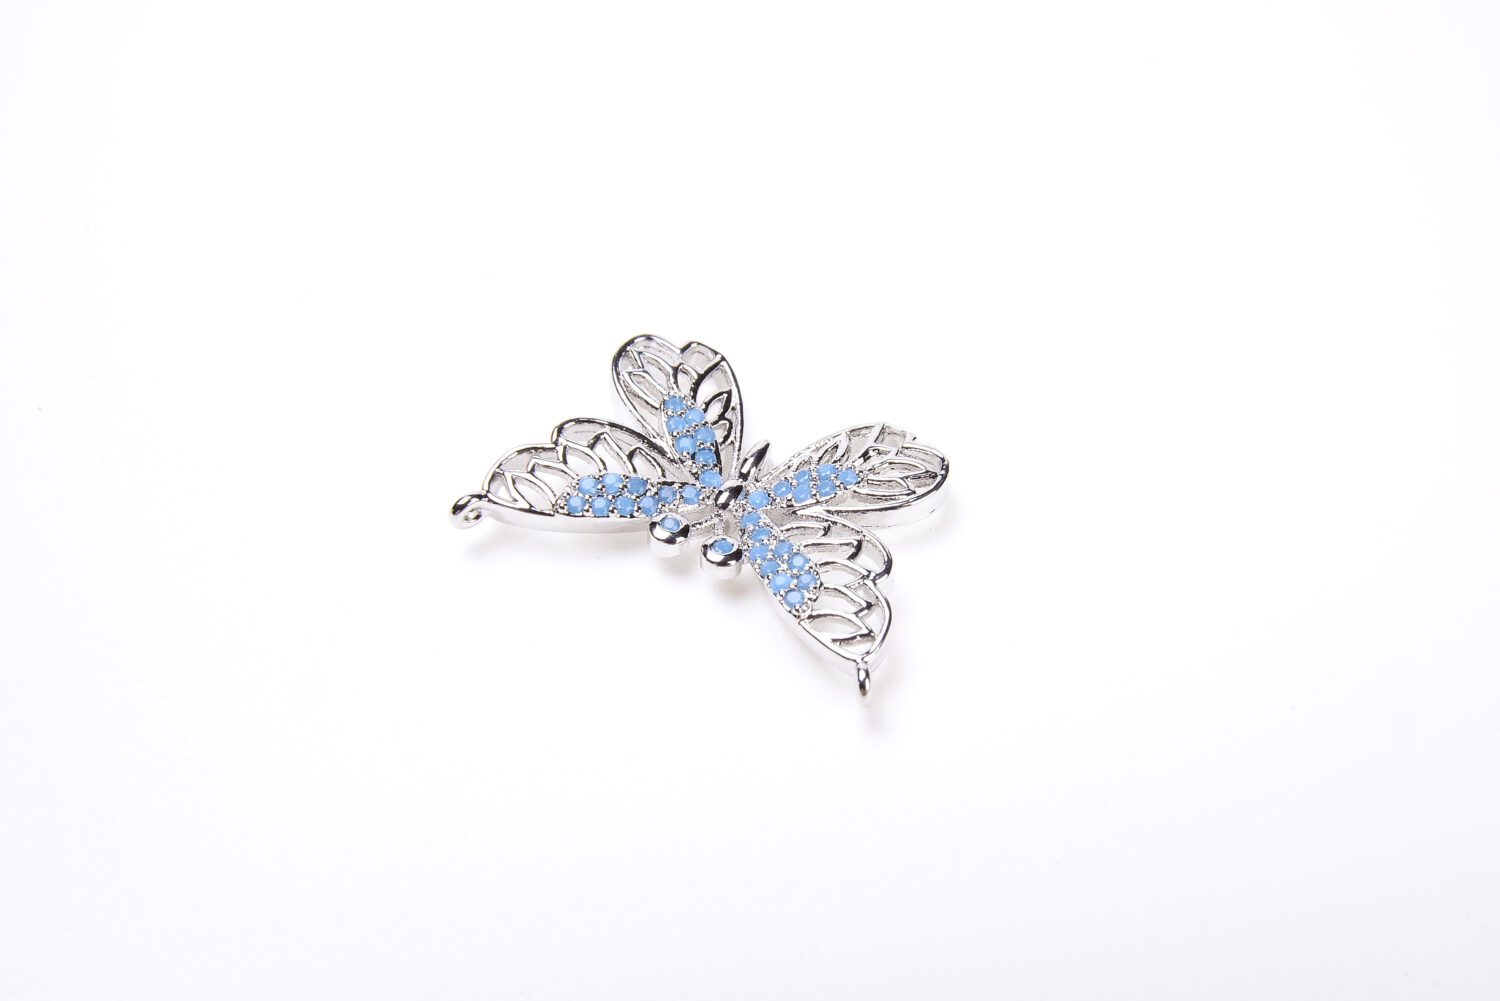 Micro Pave CZ Butterfly Pendant,Cubic Zirconia Turquoise CZ BUTTERFLY Charm 32x33mm |CP149 Cz Insect Animal Charm,12pcs